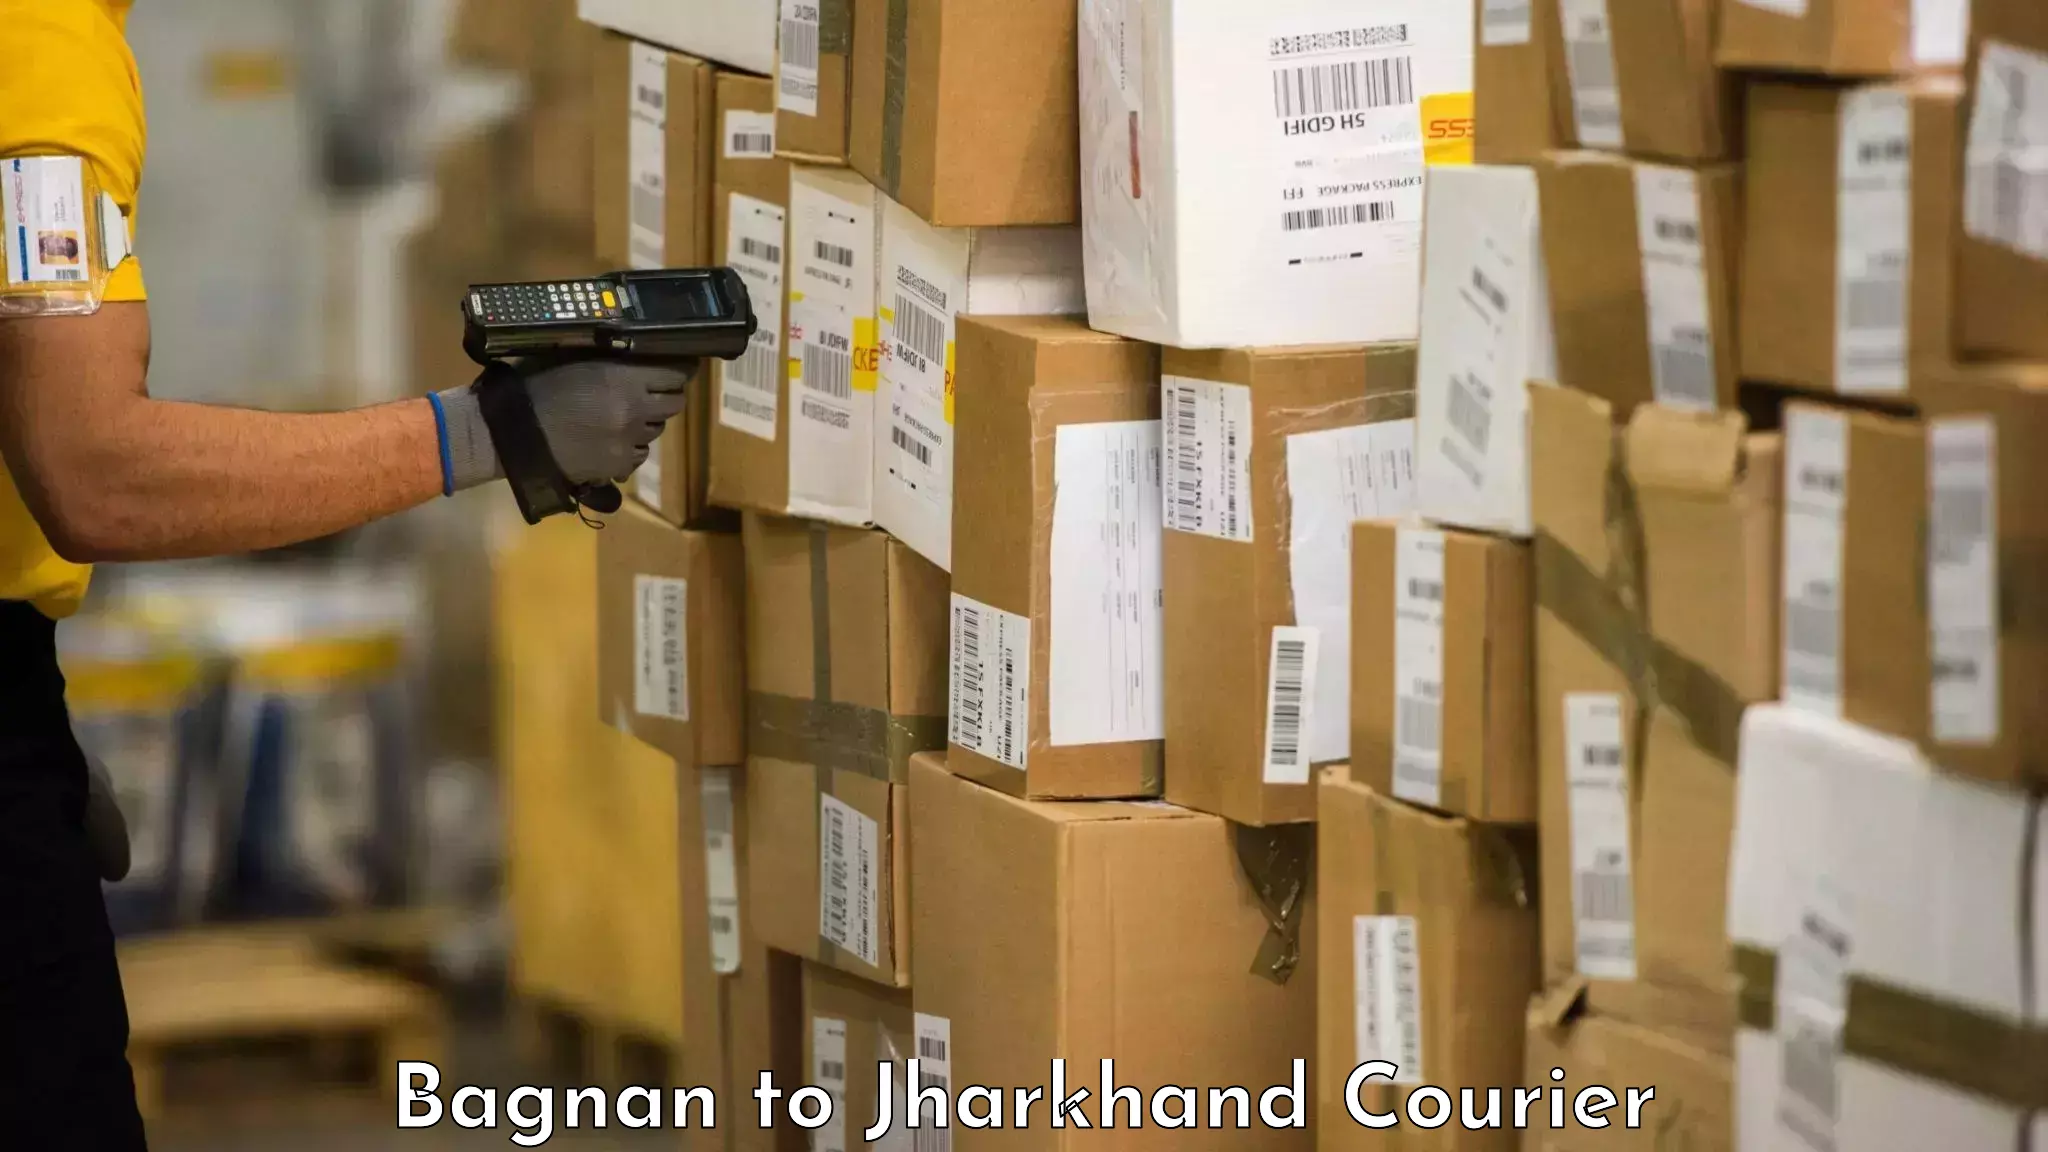 Baggage shipping advice Bagnan to Jharkhand